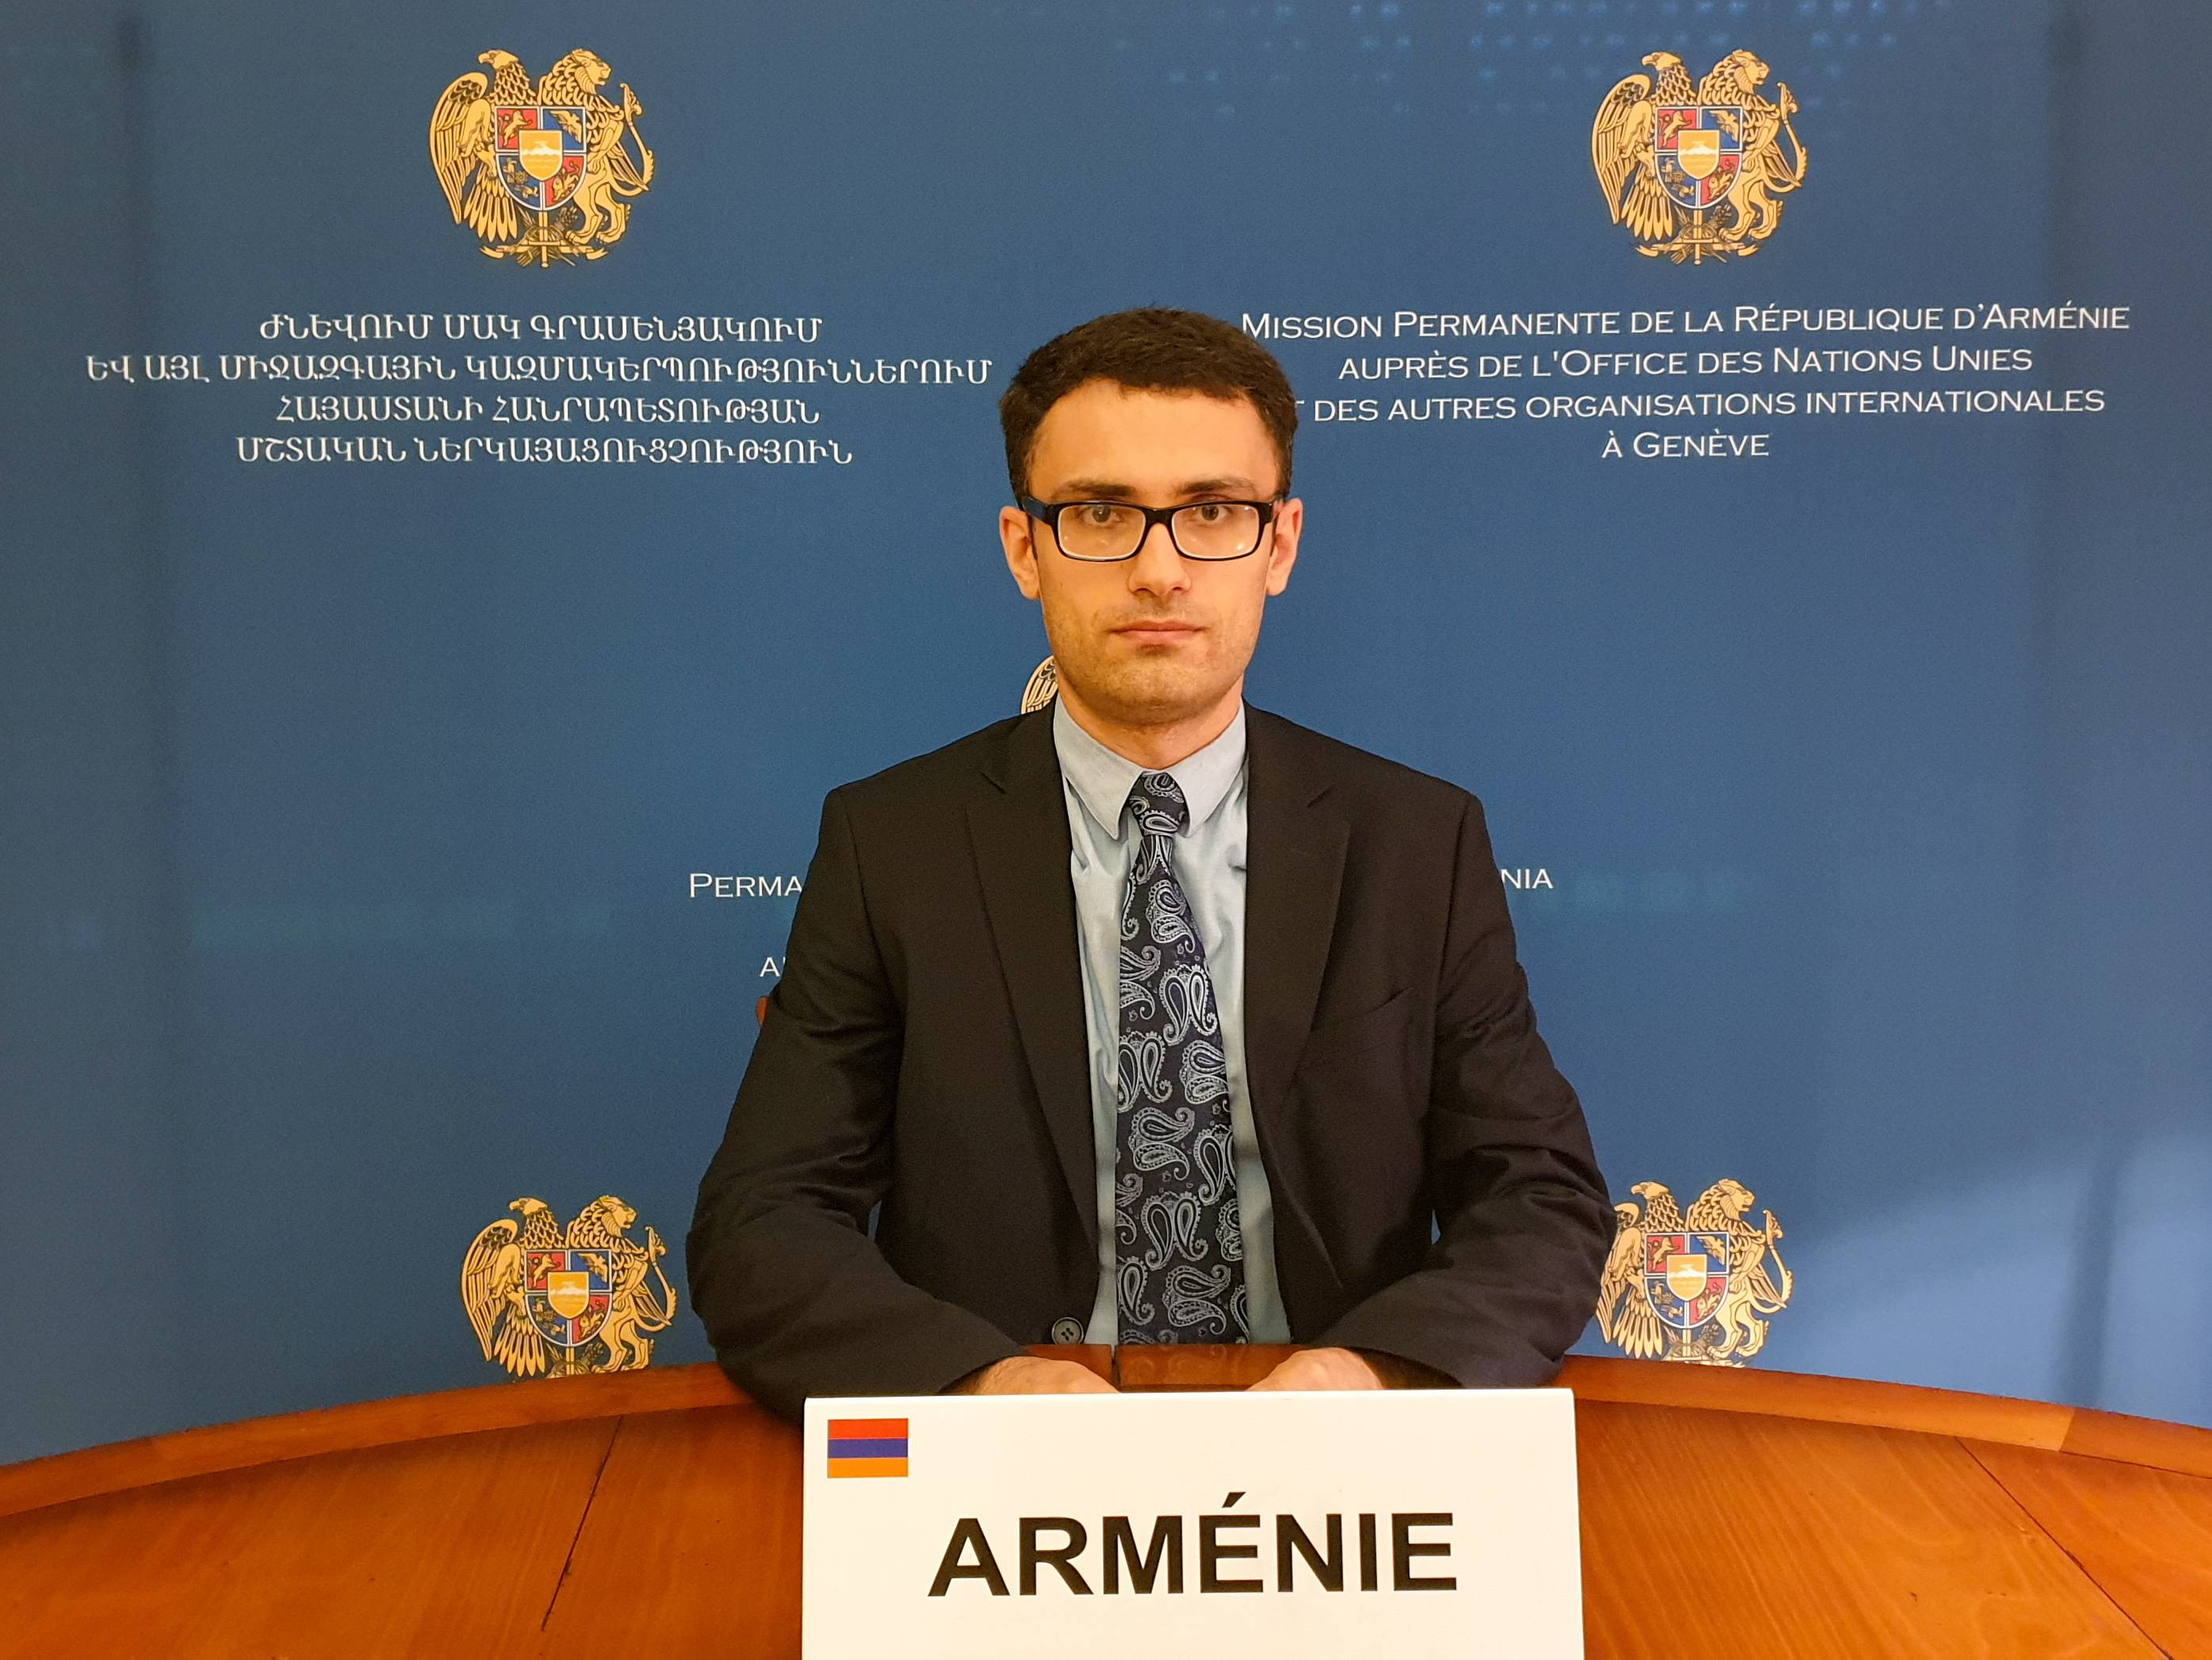 Statement of the Delegation of Armenia during the Interactive Dialogue with Special Rapporteur on the Right to Education